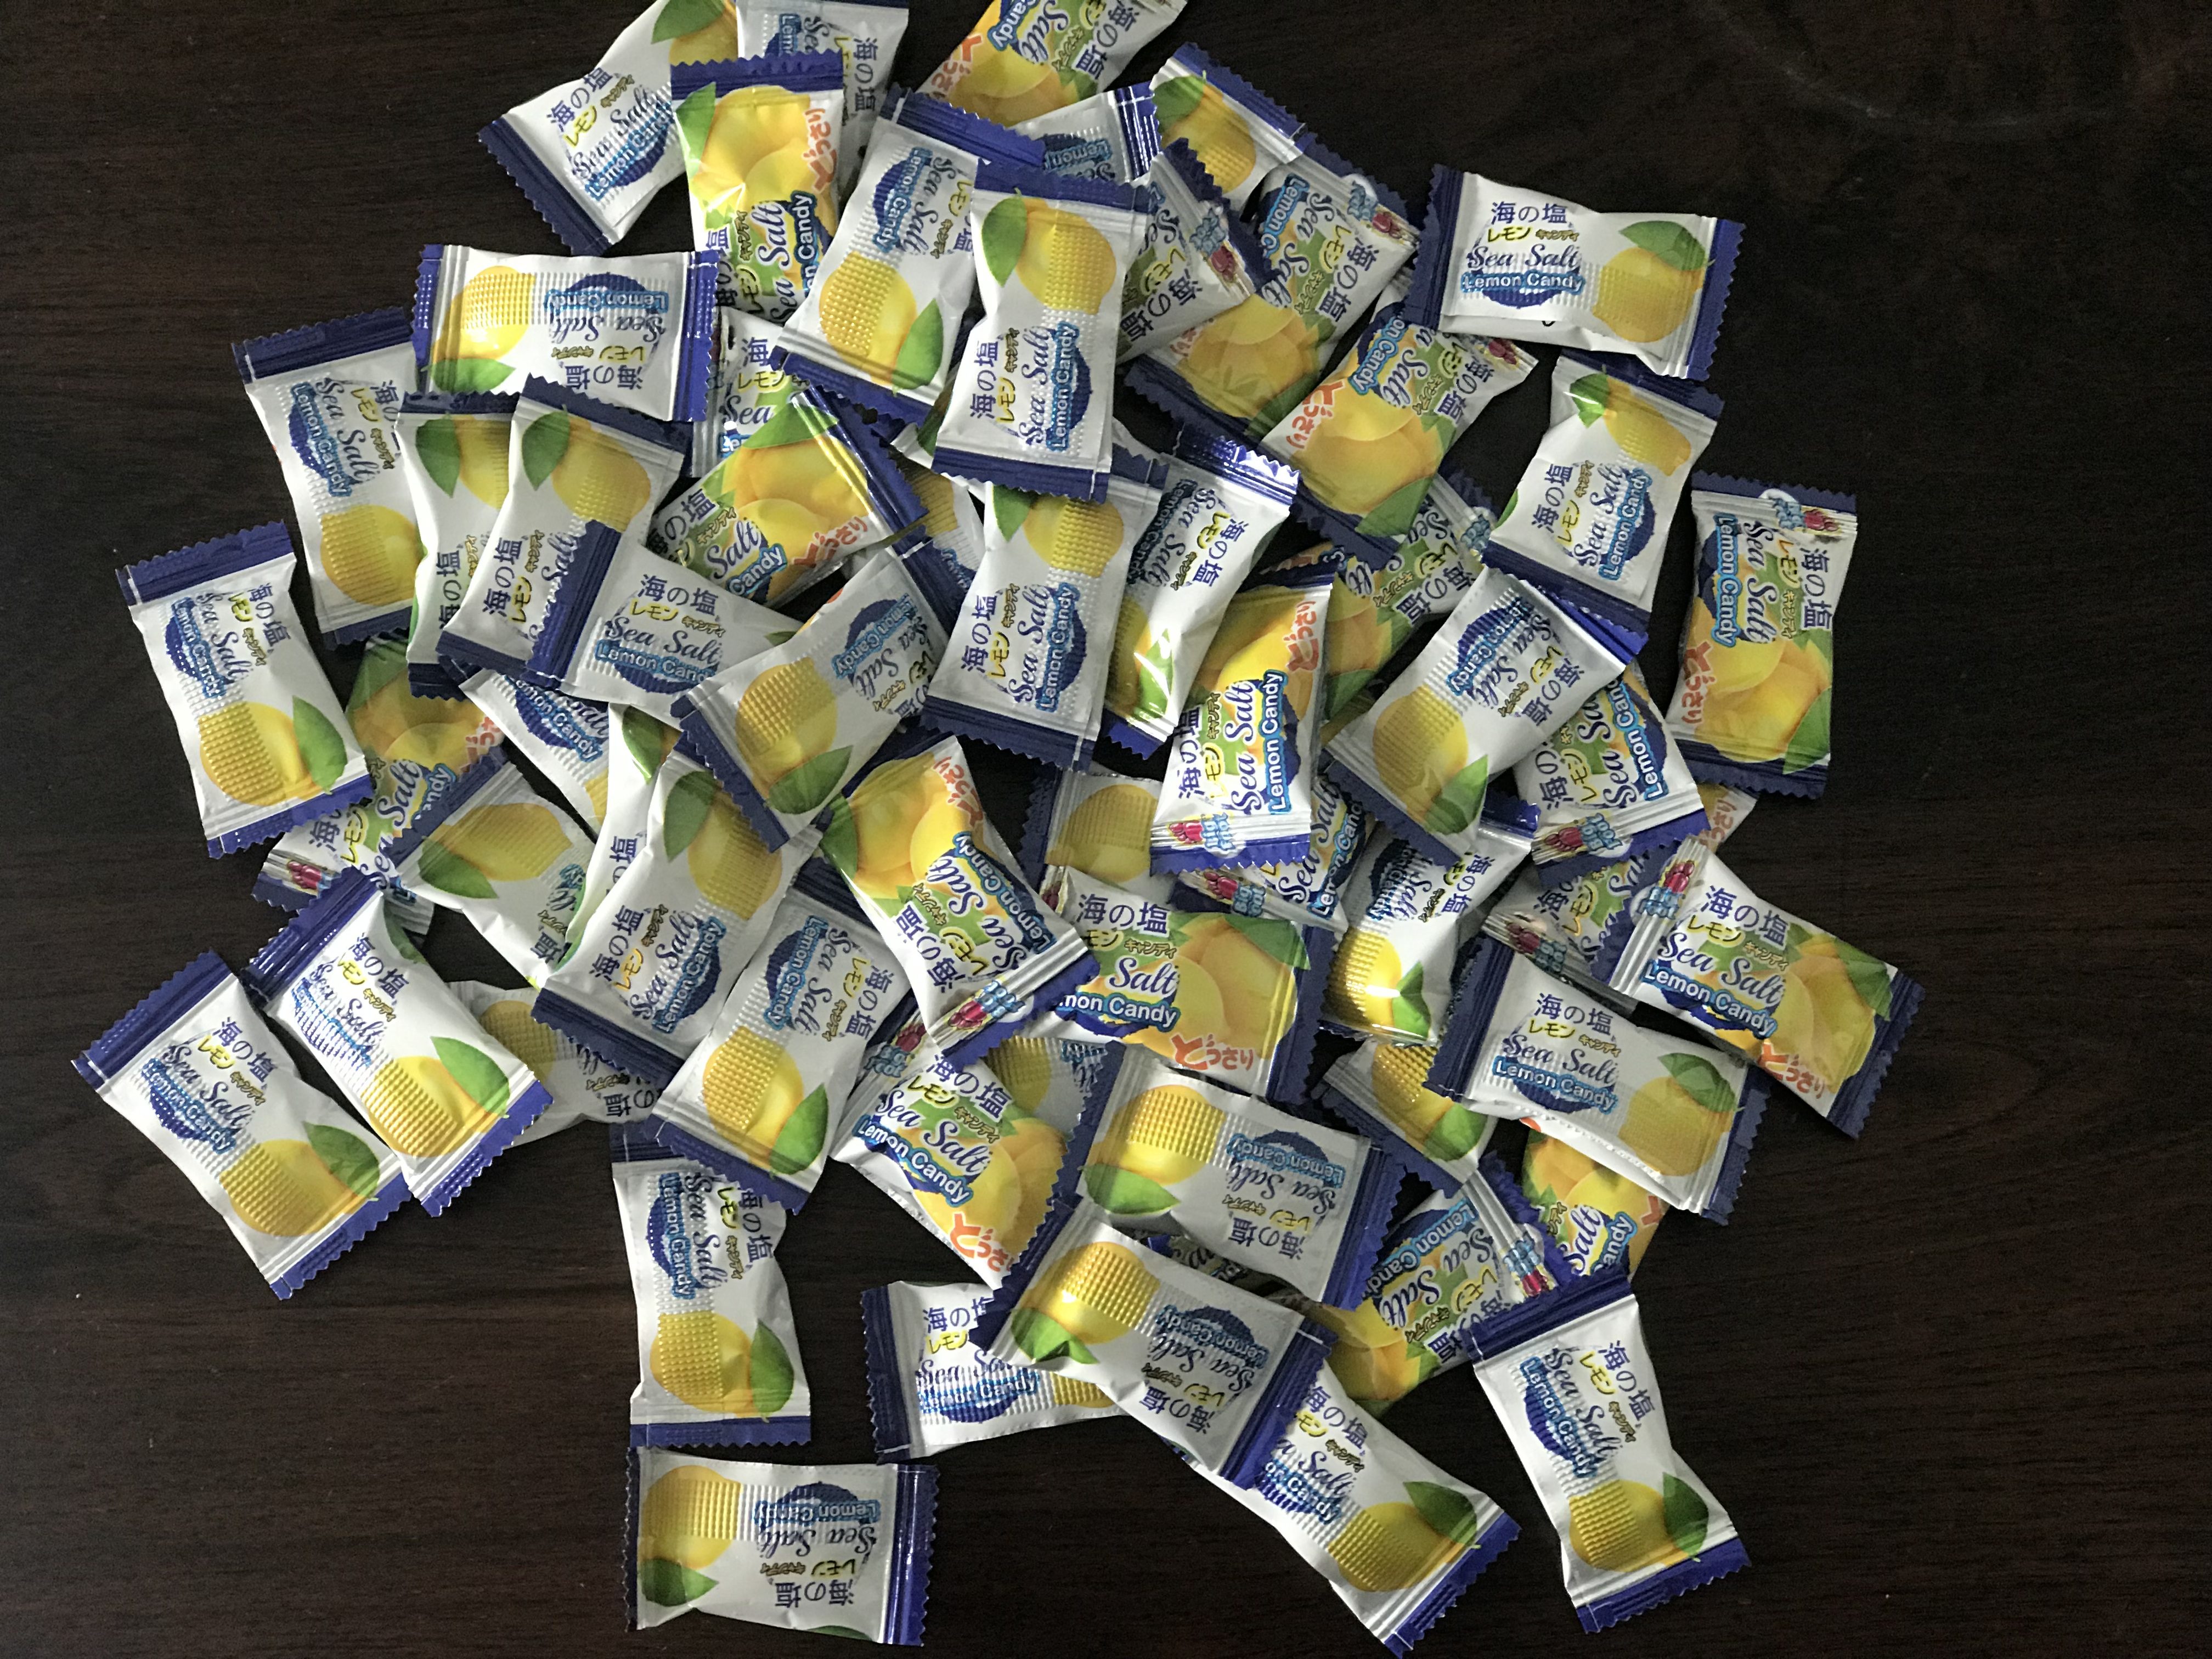 Big Foot Sea Salt Lemon Candy now available at Giant Singapore for $2 - 4